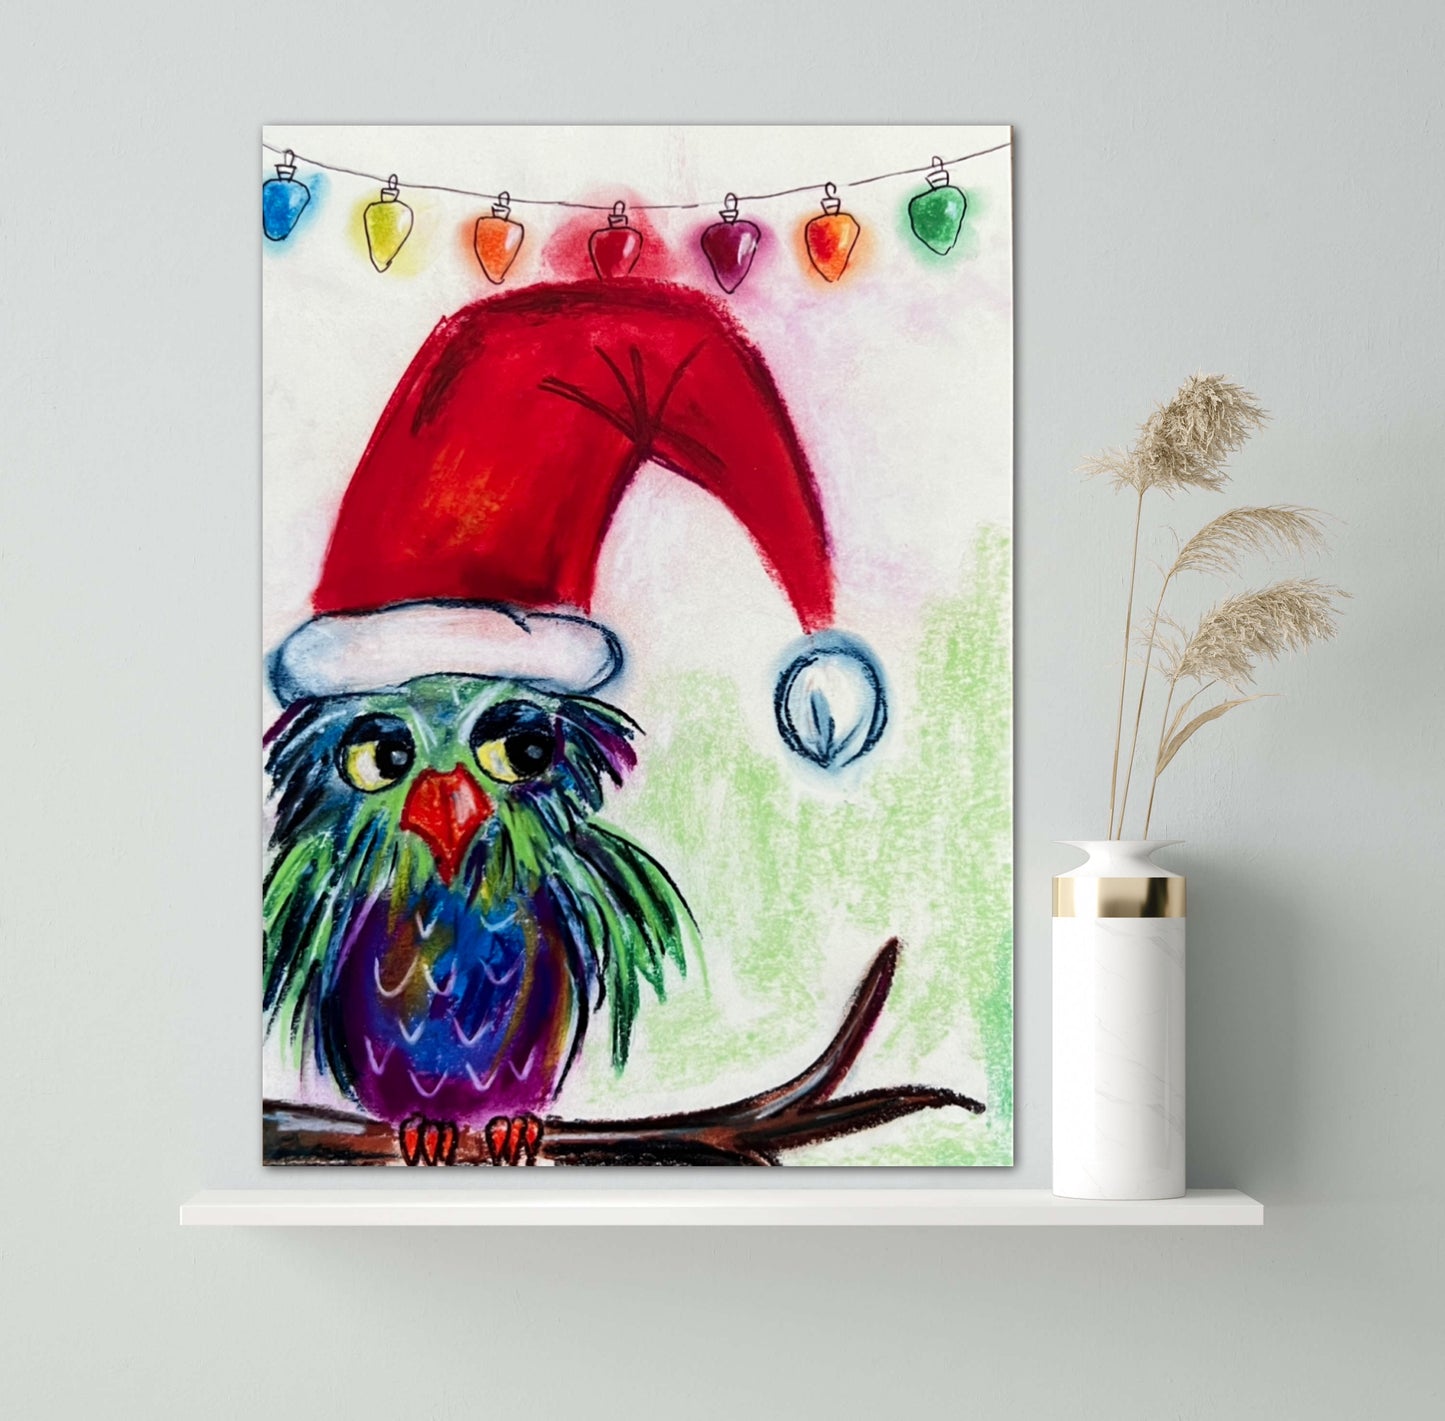 Santa Owl - fine prints and canvas prints in more size